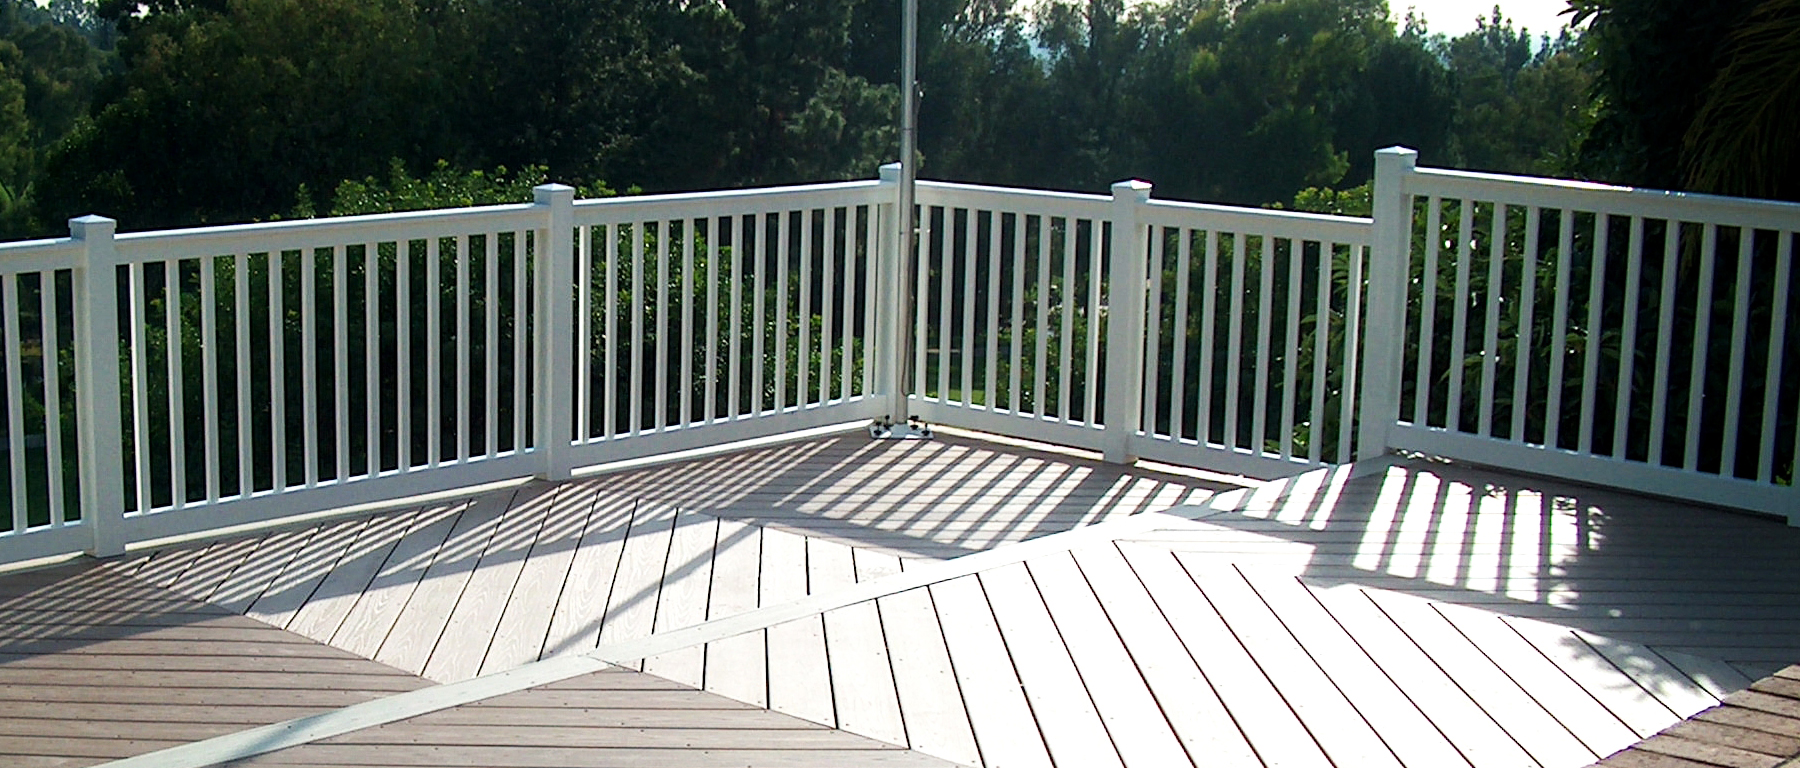 Covers, Storage – Decks Fence, Vinyl Duramax Panels, Solutions, Wall & More Patio